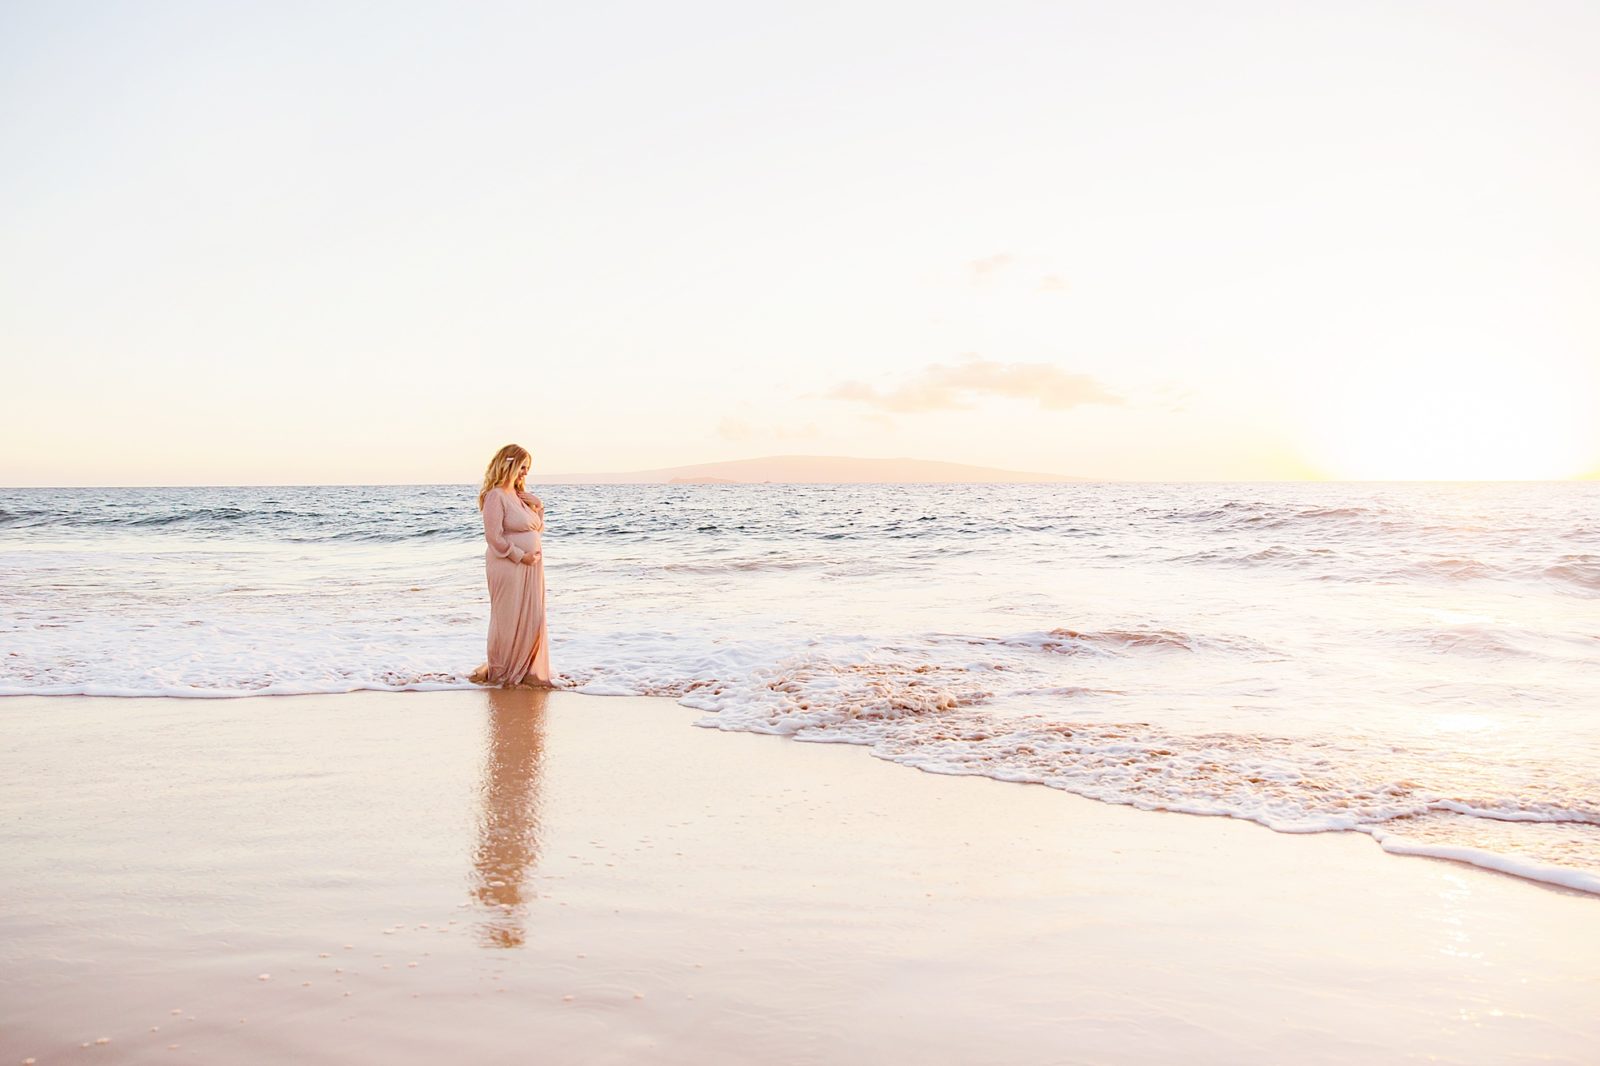 Sunset Wailea Babymoon Portraits - Expecting the couples' first child